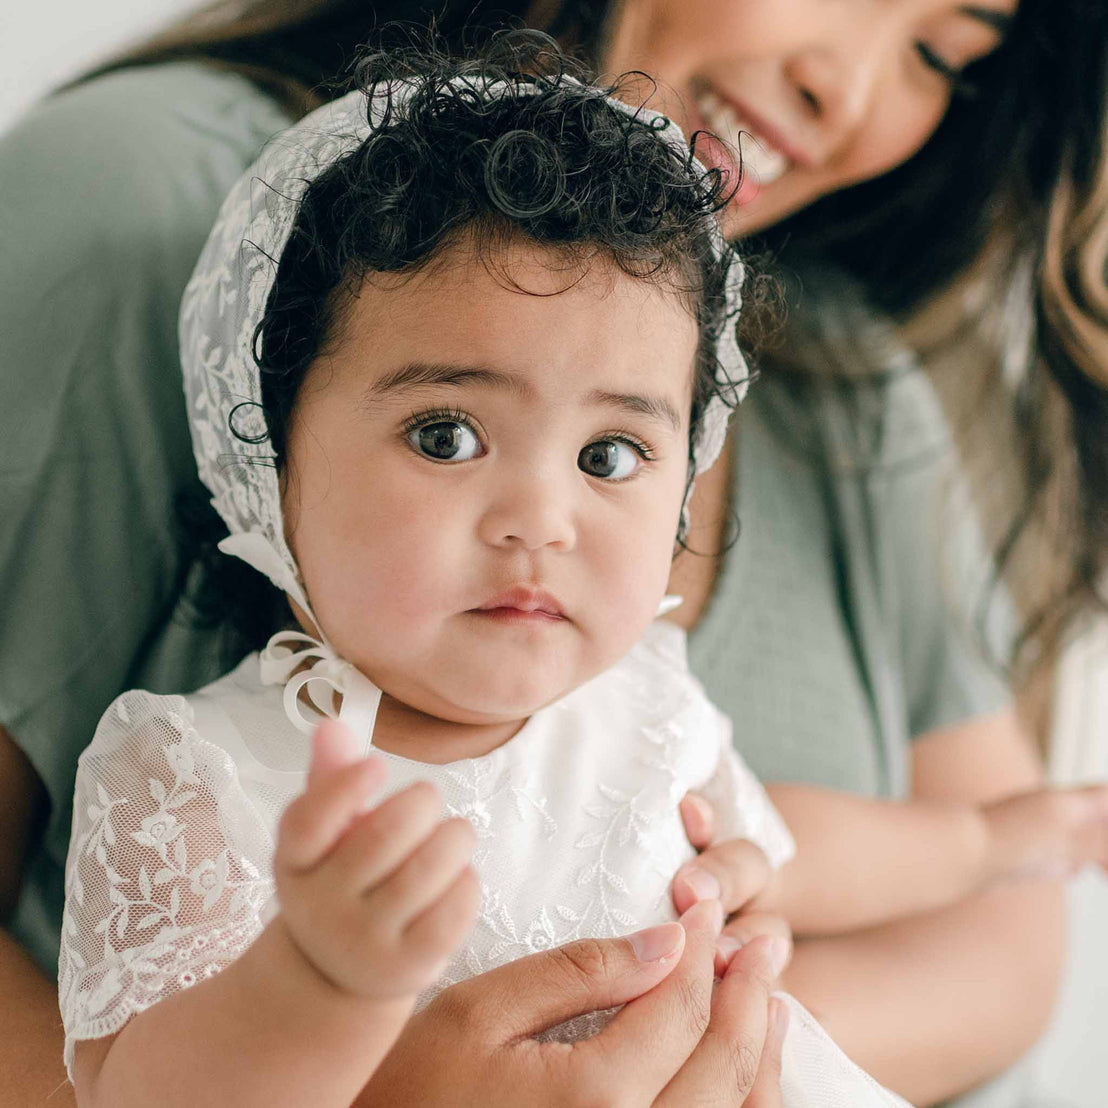 A baby wearing an Ella Lace Bonnet with floral embroidered lace and the Ella Christening Gown gazes into the camera while being held by her smiling mother in the background. The baby has curly hair and large eyes, with a calm expression on their face.